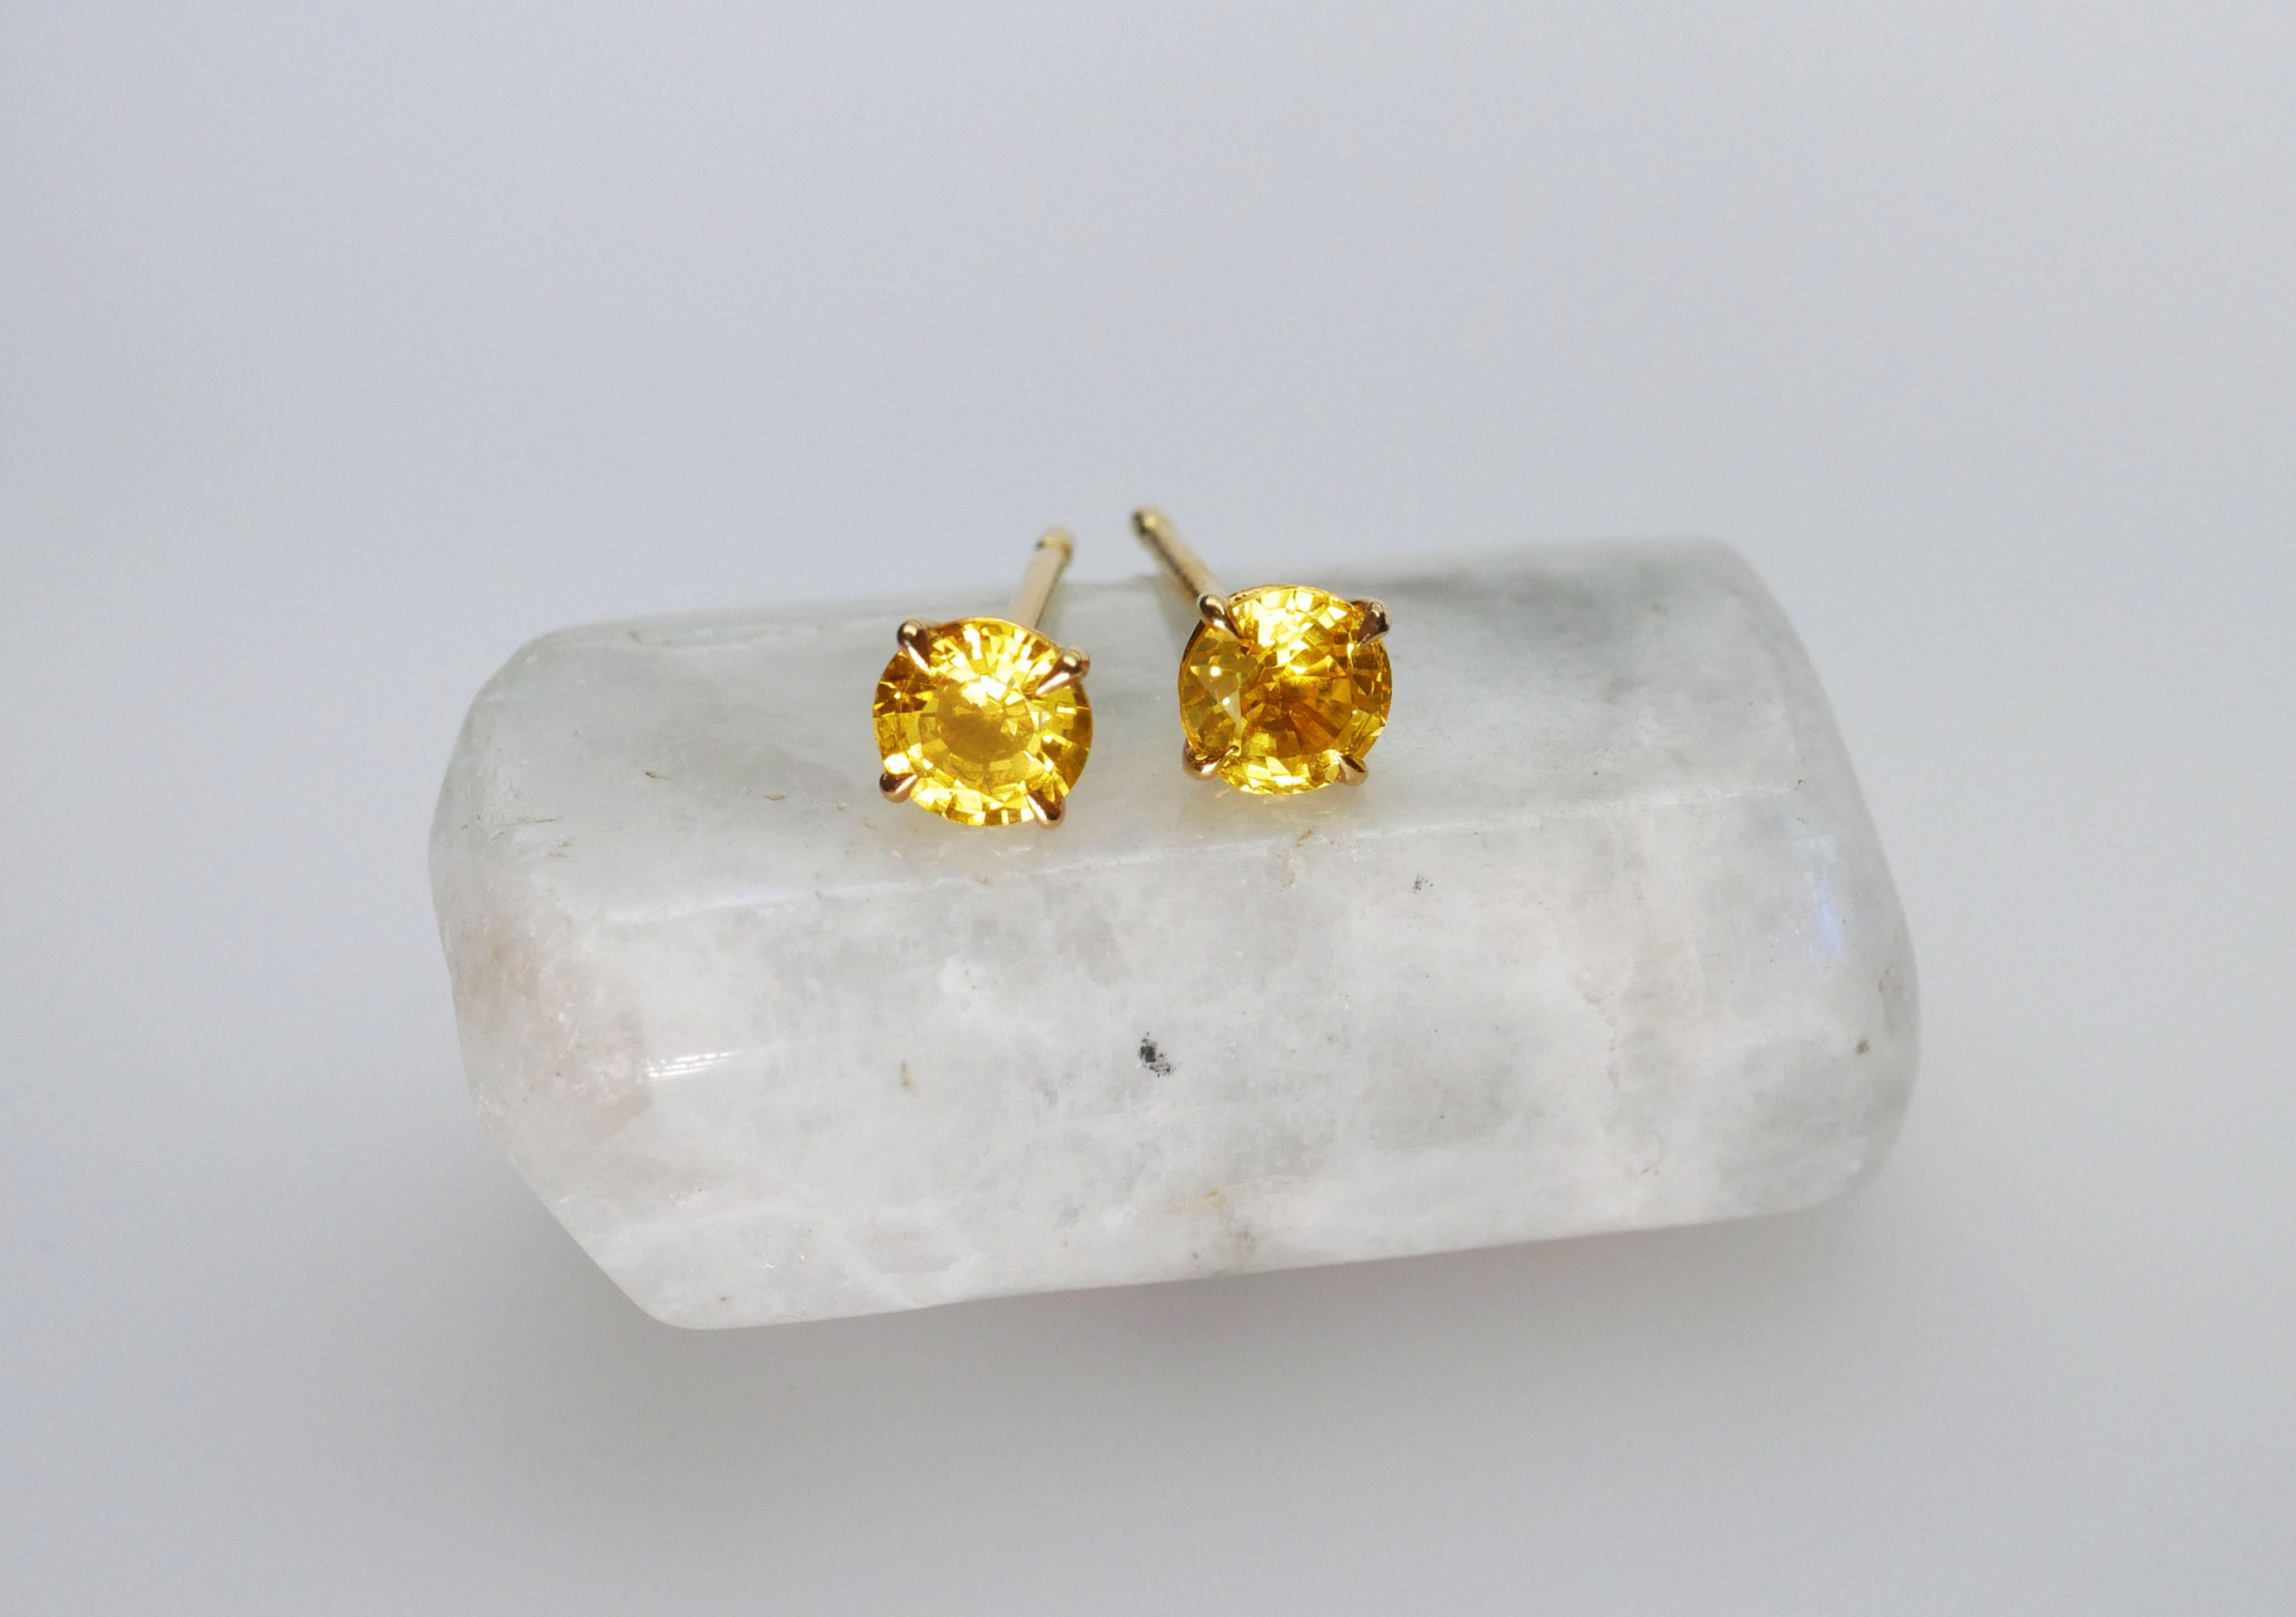 Hand made solitaire warm yellow round sapphire stud earrings in 18k yellow gold. Minimal and elegant with talon-shaped claws and an open basket setting,  to put on and never take off.

Total Yellow Sapphire Weight 2/1.10 Carat.